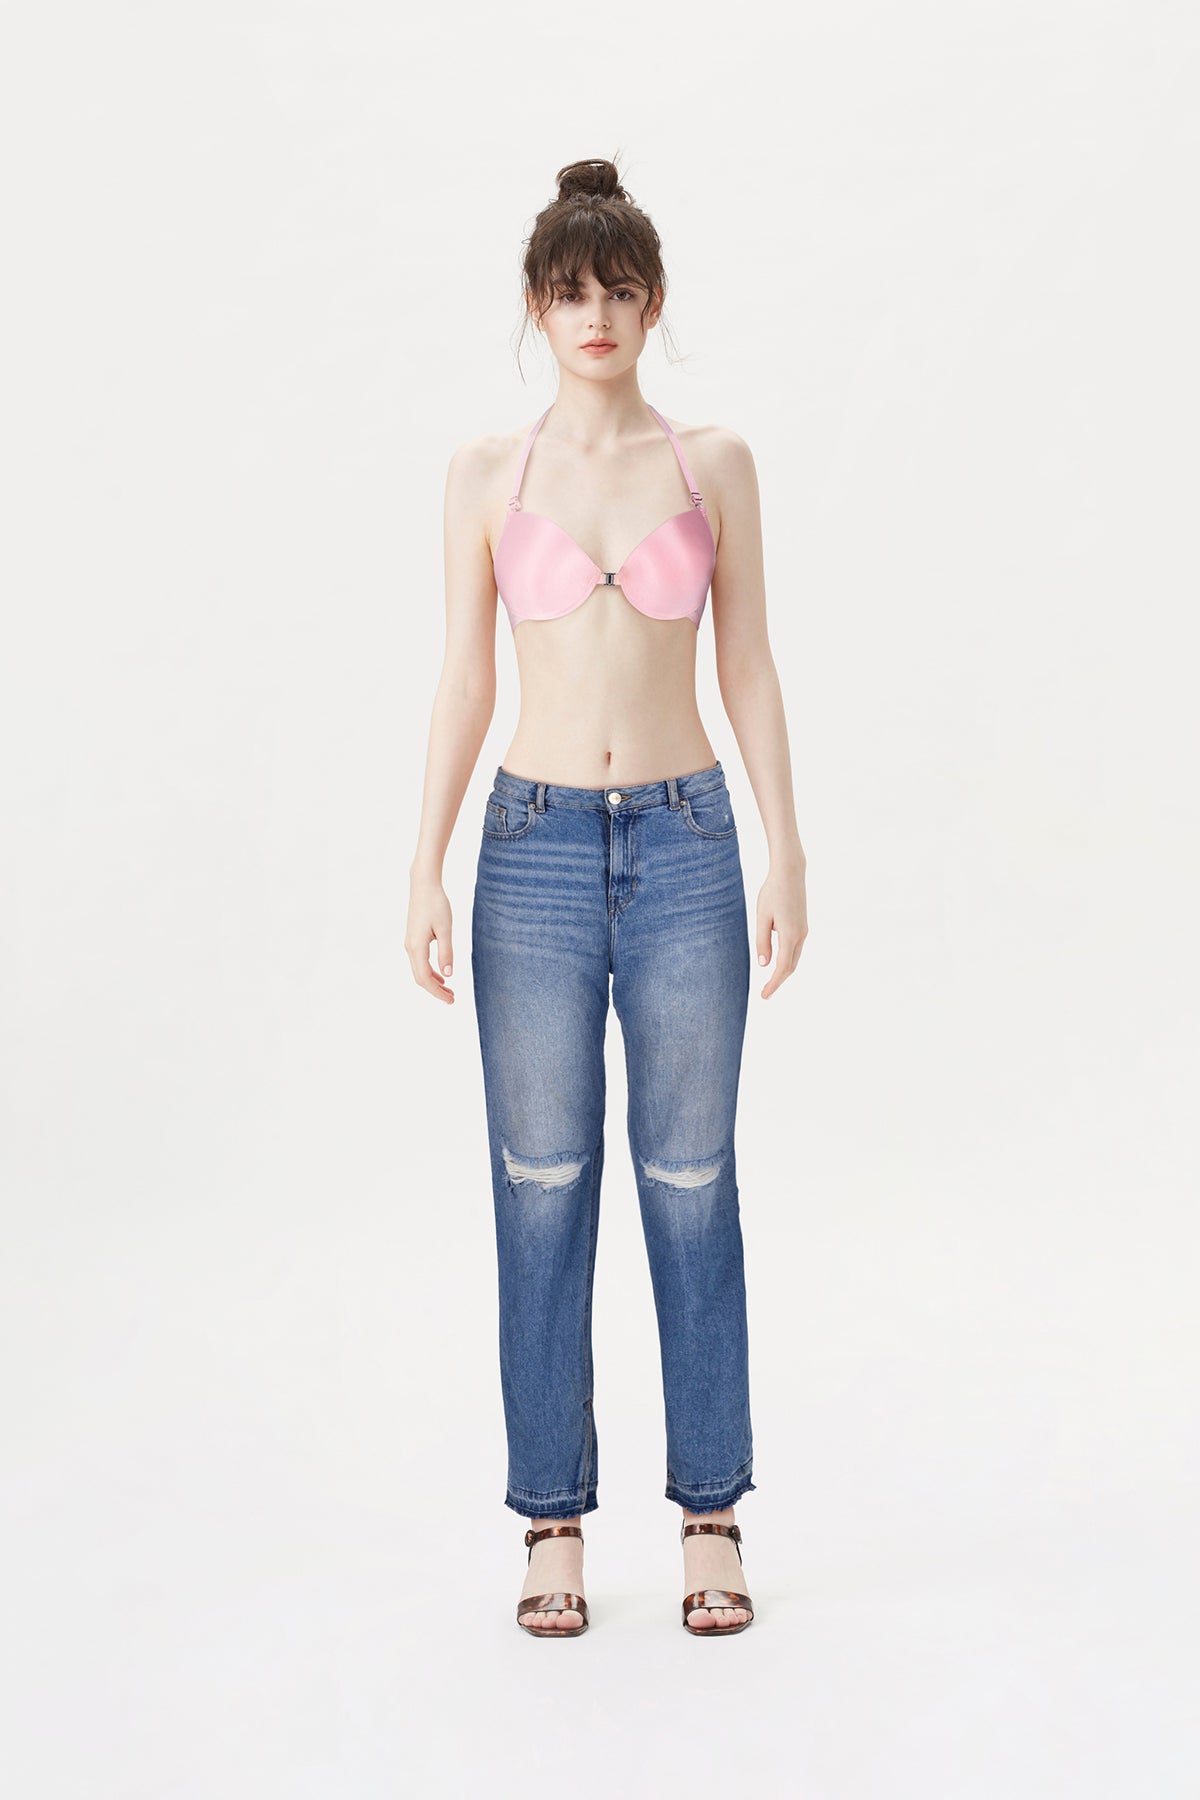 BLS - Frida Wired And Pushup Bra - Pink